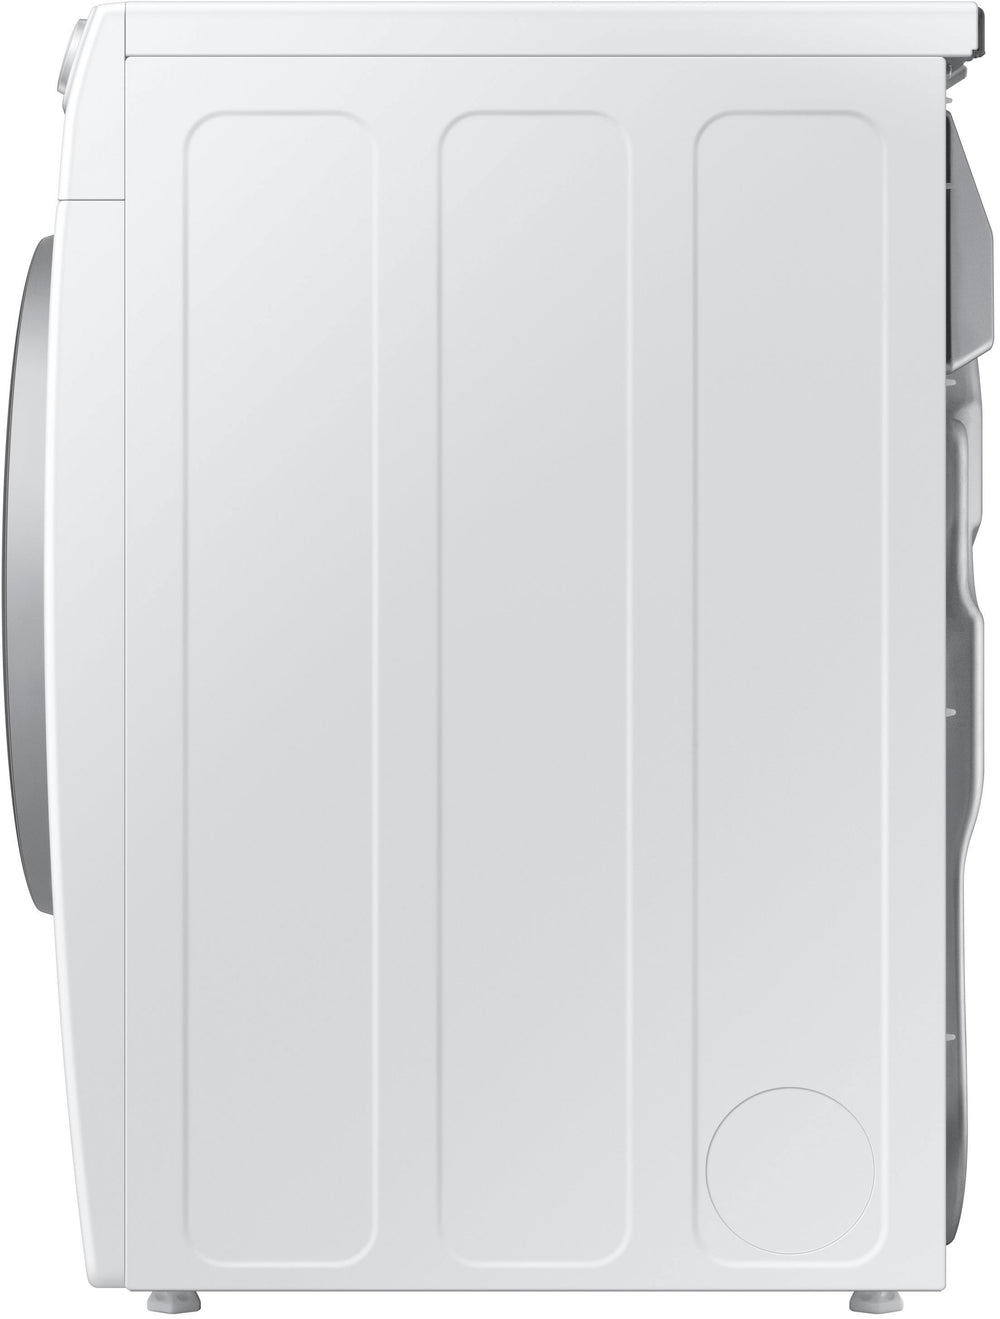 Samsung - 4.0 cu. ft. Electric Dryer with AI Smart Dial and Wi-Fi Connectivity - White_1